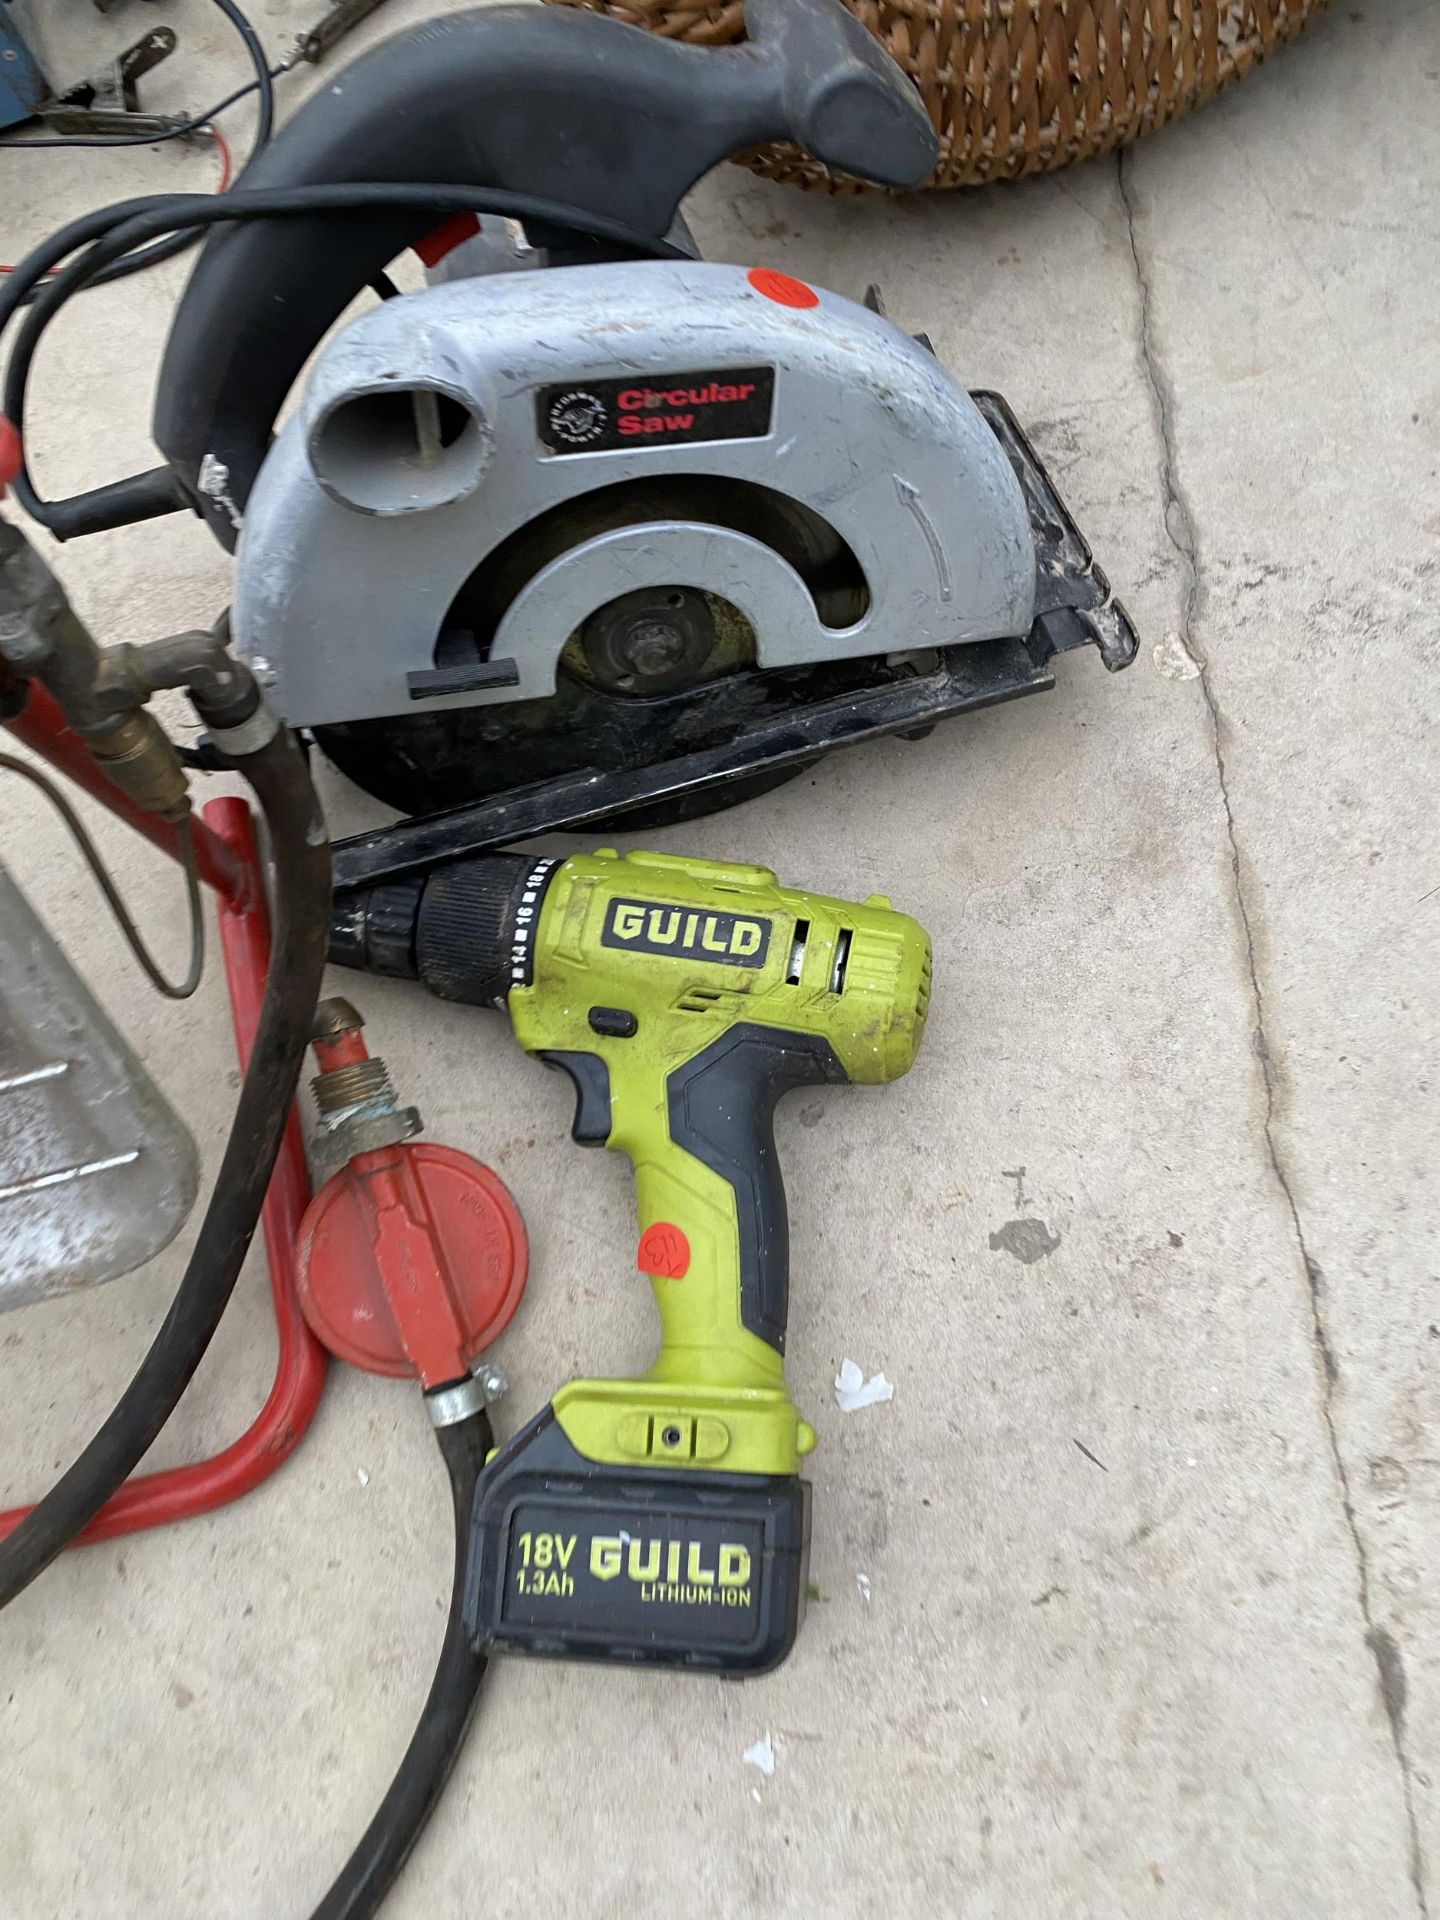 A GAS HEATER, AN ELECTRIC CIRCULAR SAW AND A GUILD BATTERY DRILL - Image 2 of 3